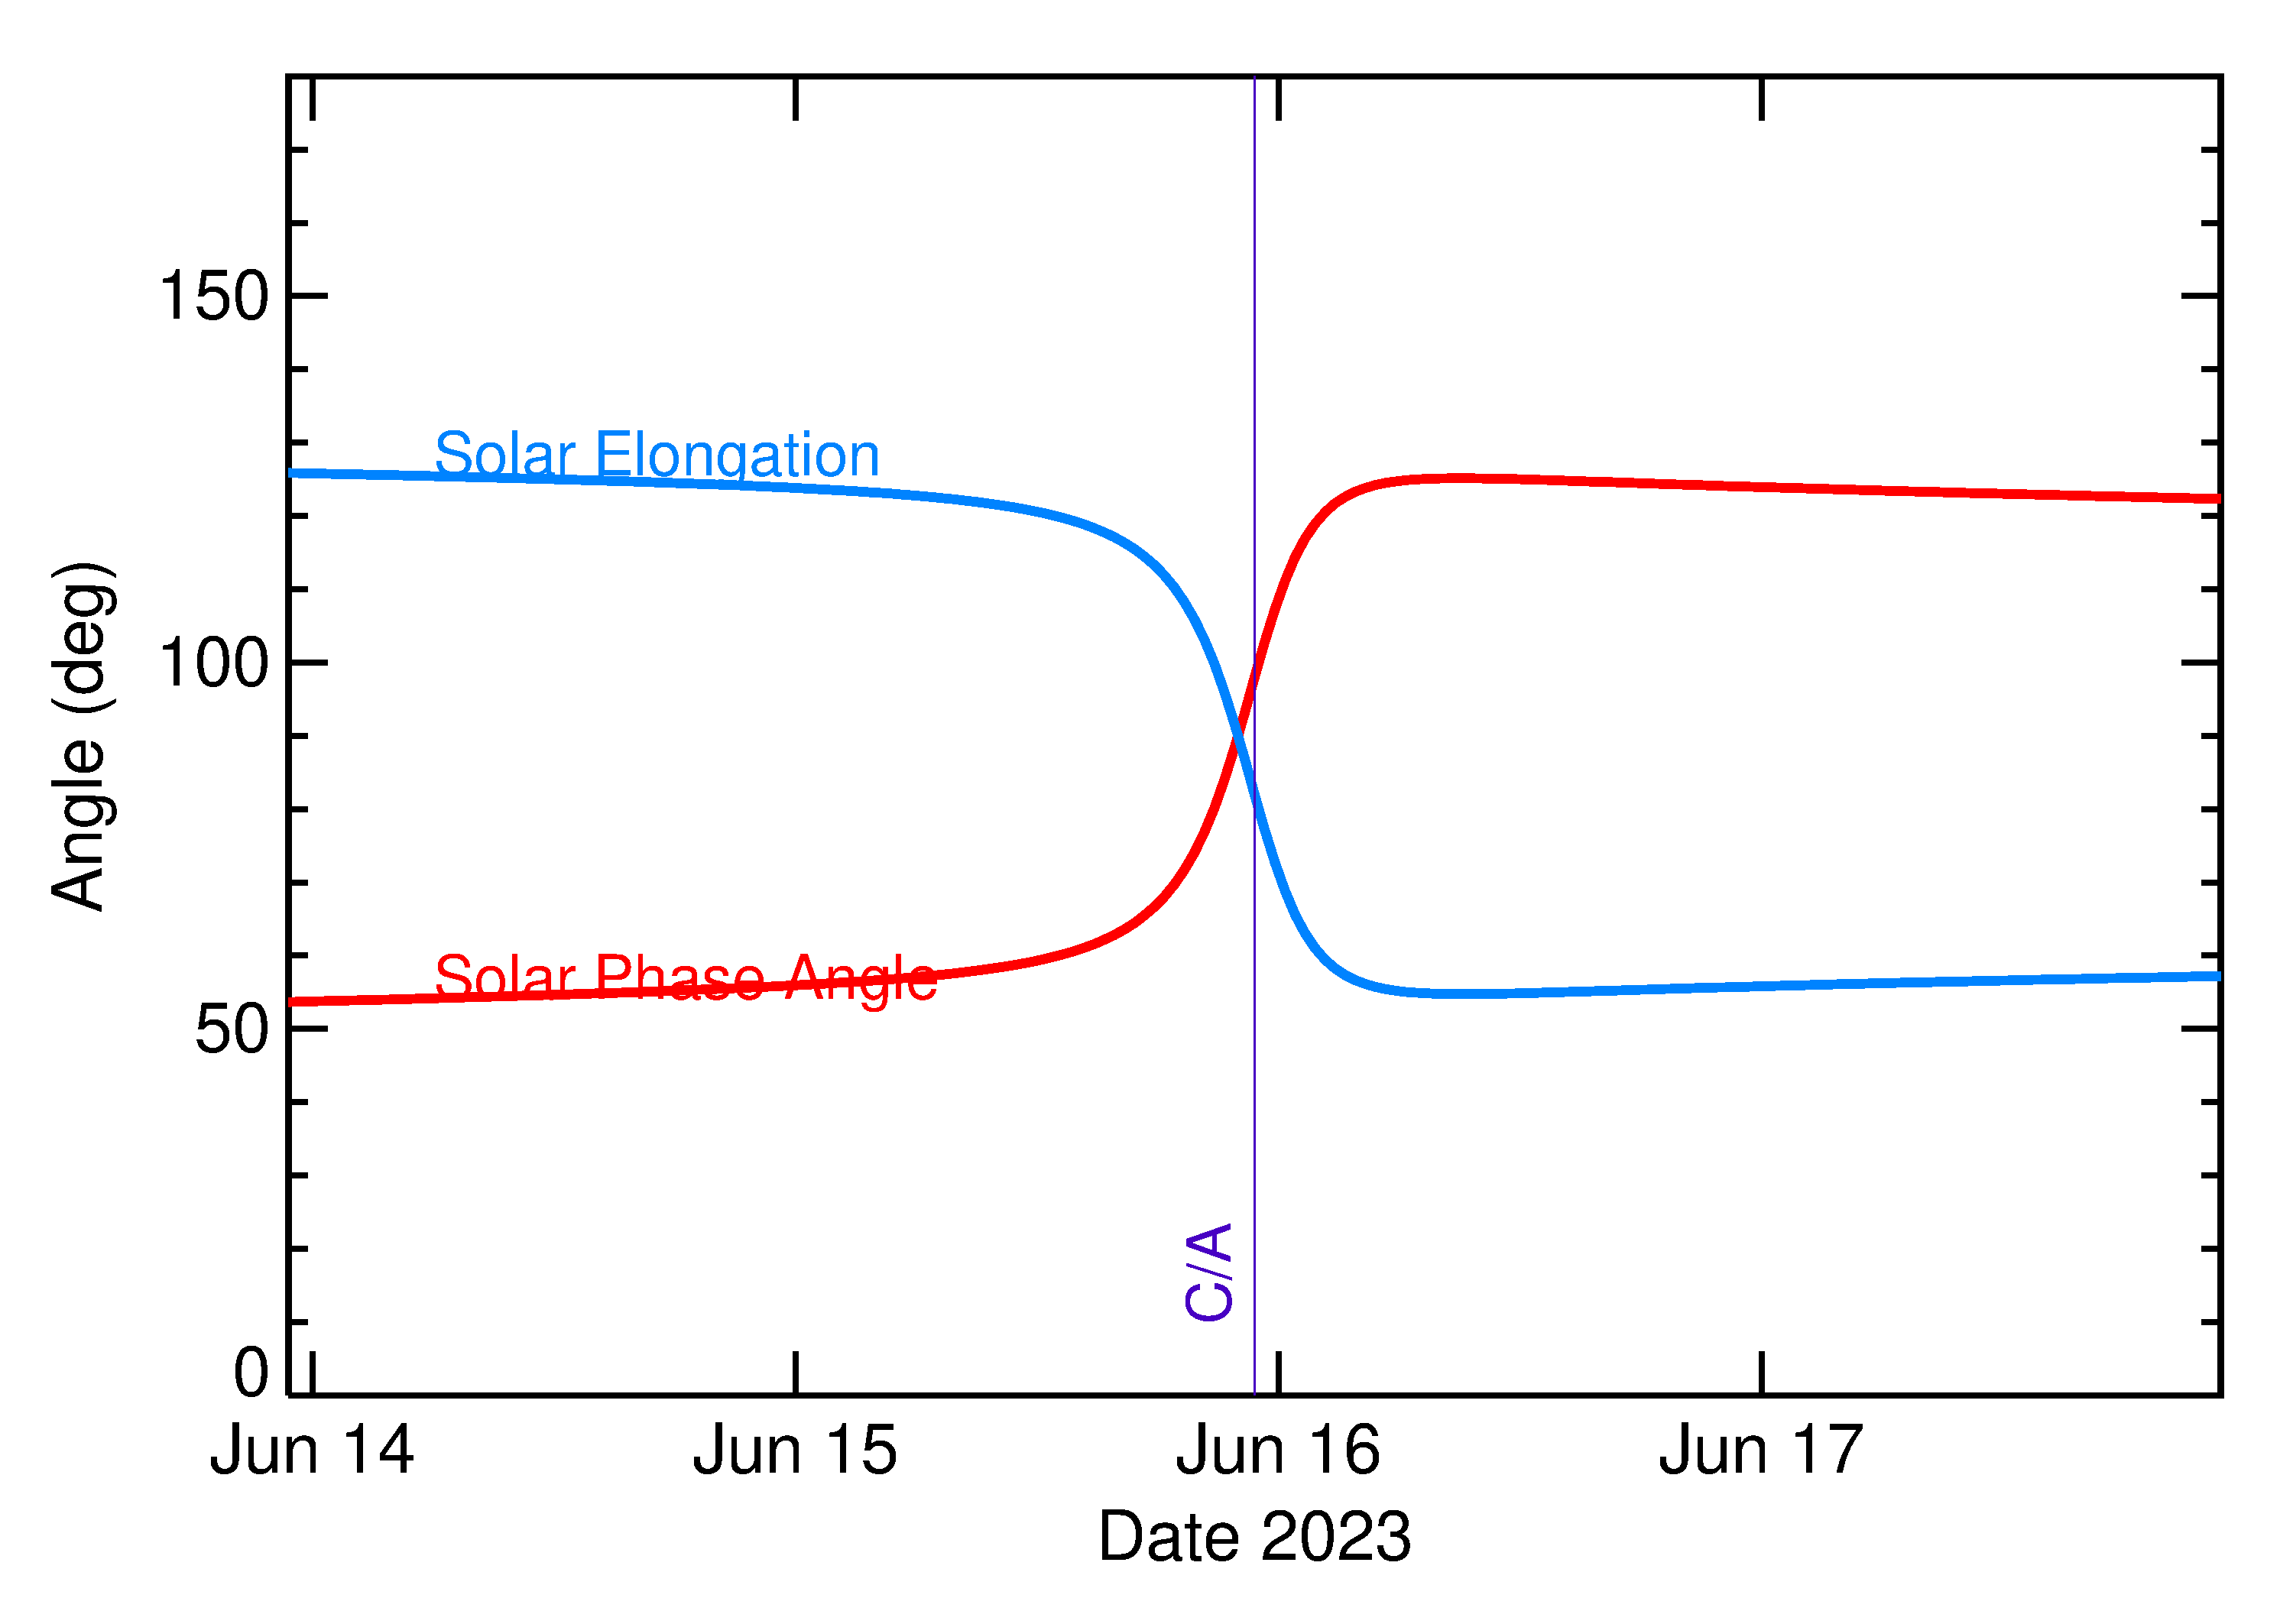 Solar Elongation and Solar Phase Angle of 2023 LM1 in the days around closest approach